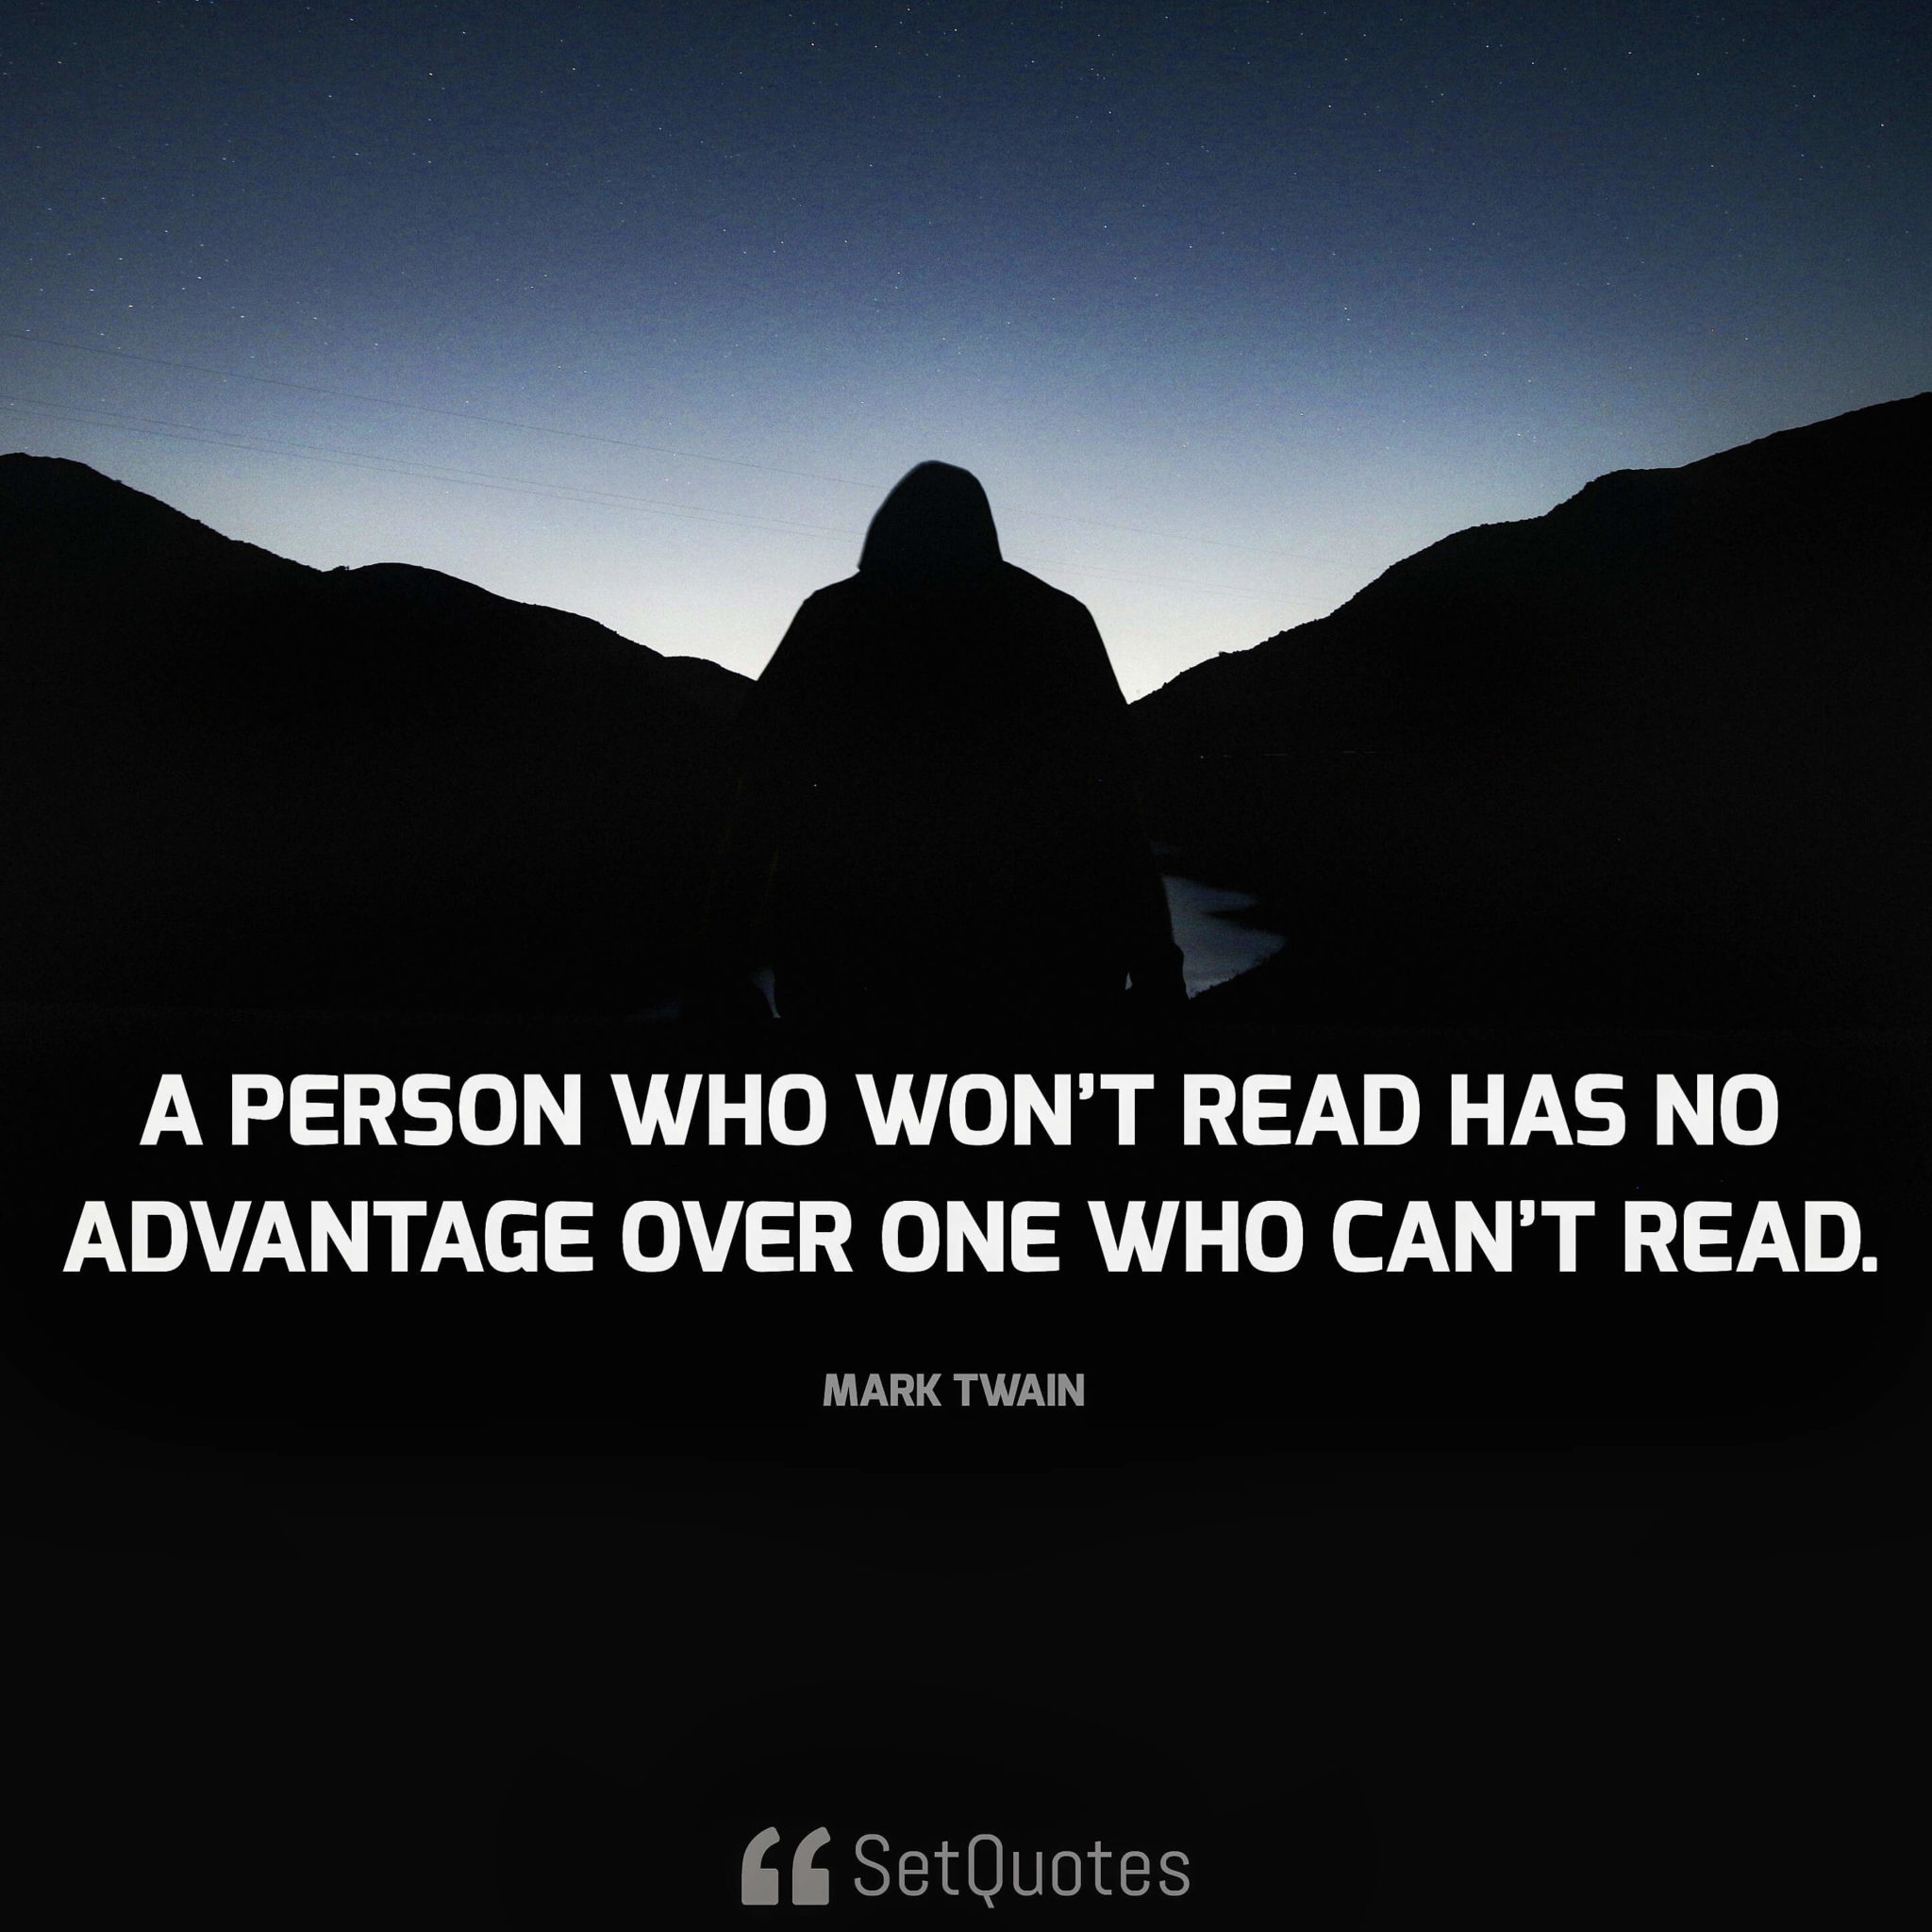 A person who won't read has no advantage over one who can't read. - Mark Twain